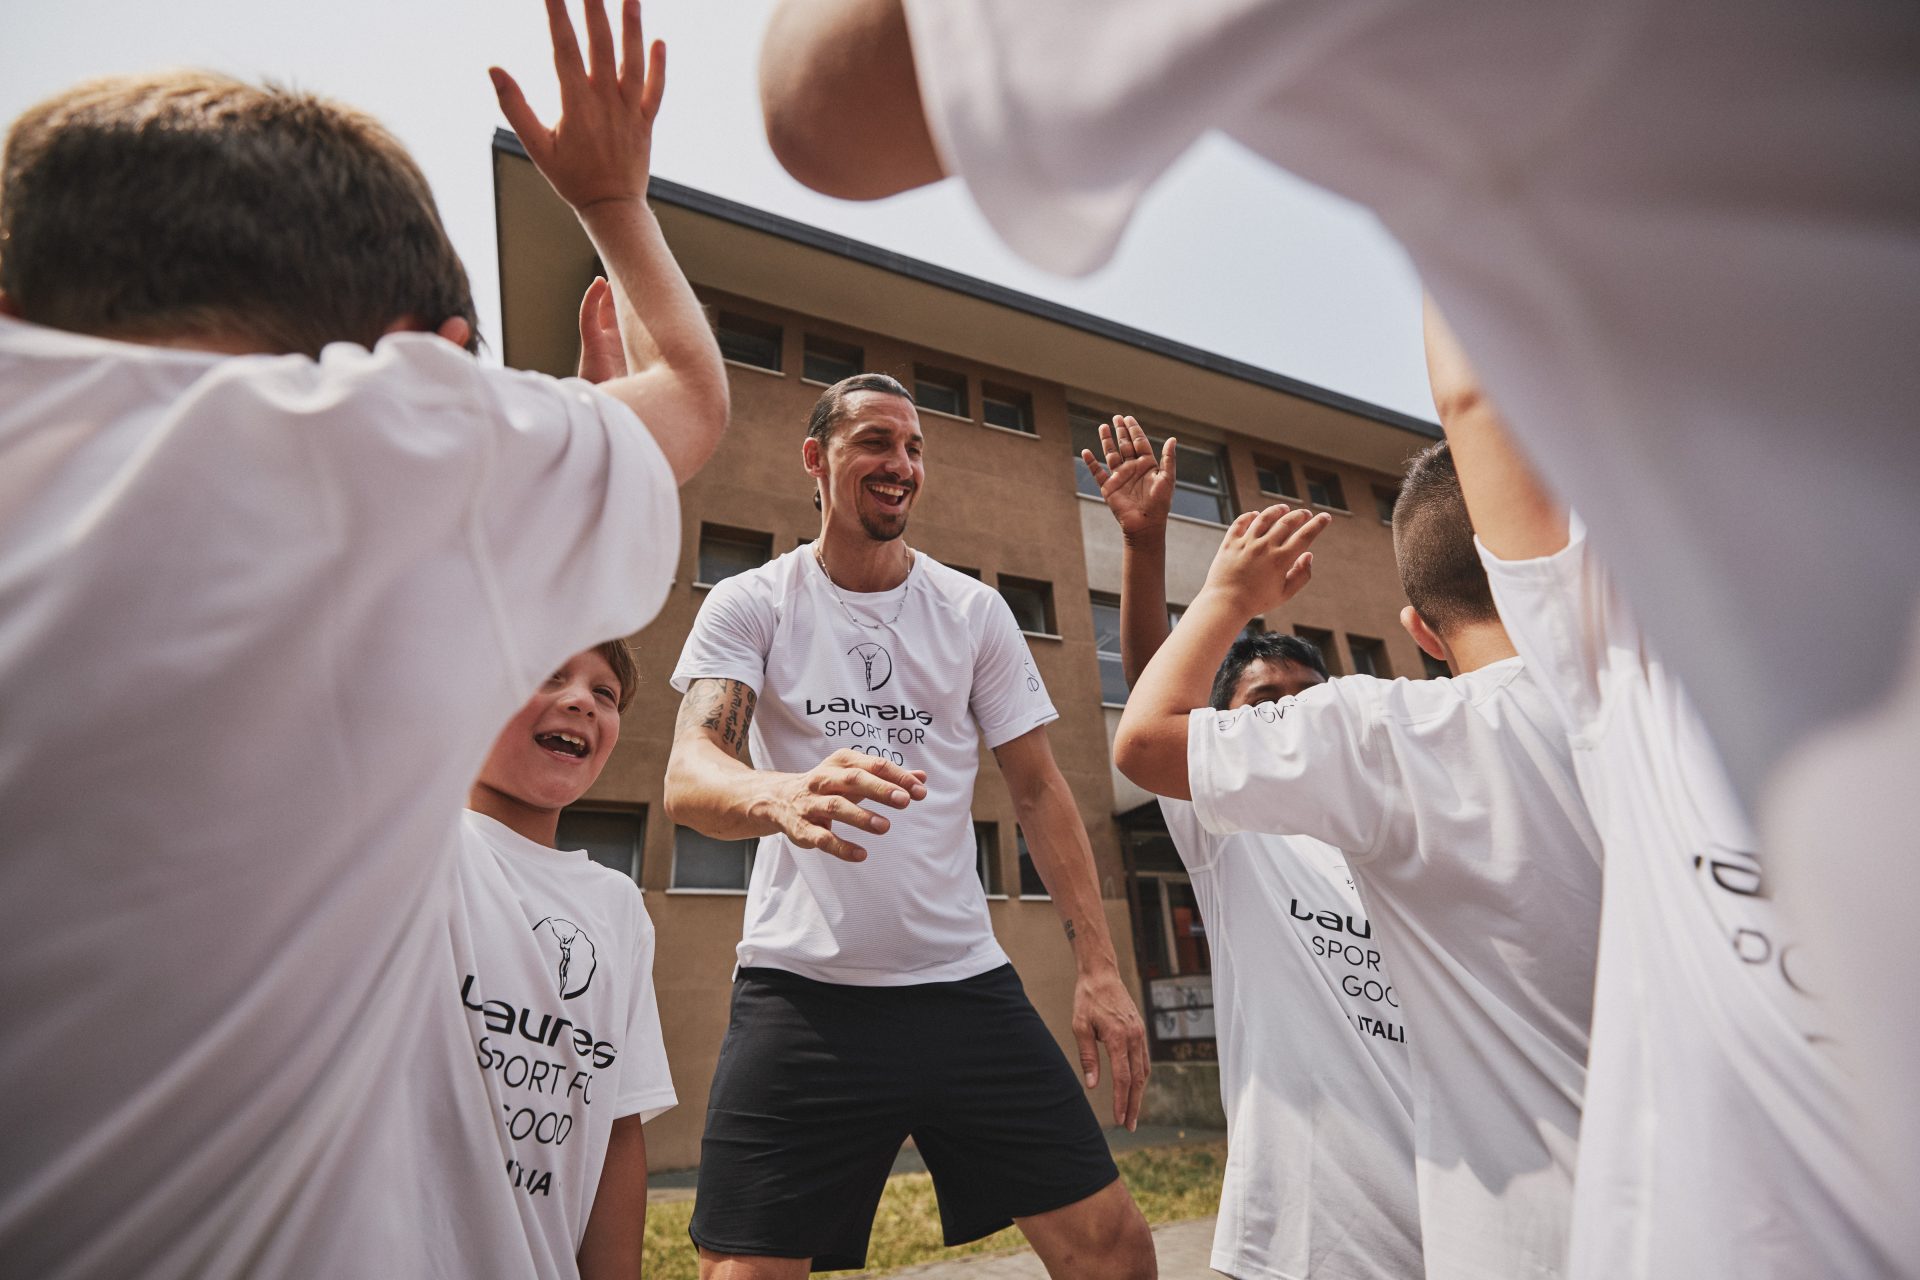 H&M Move and Zlatan Ibrahimović team up with Laureus Sport for Good to  empower youth - H&M Group